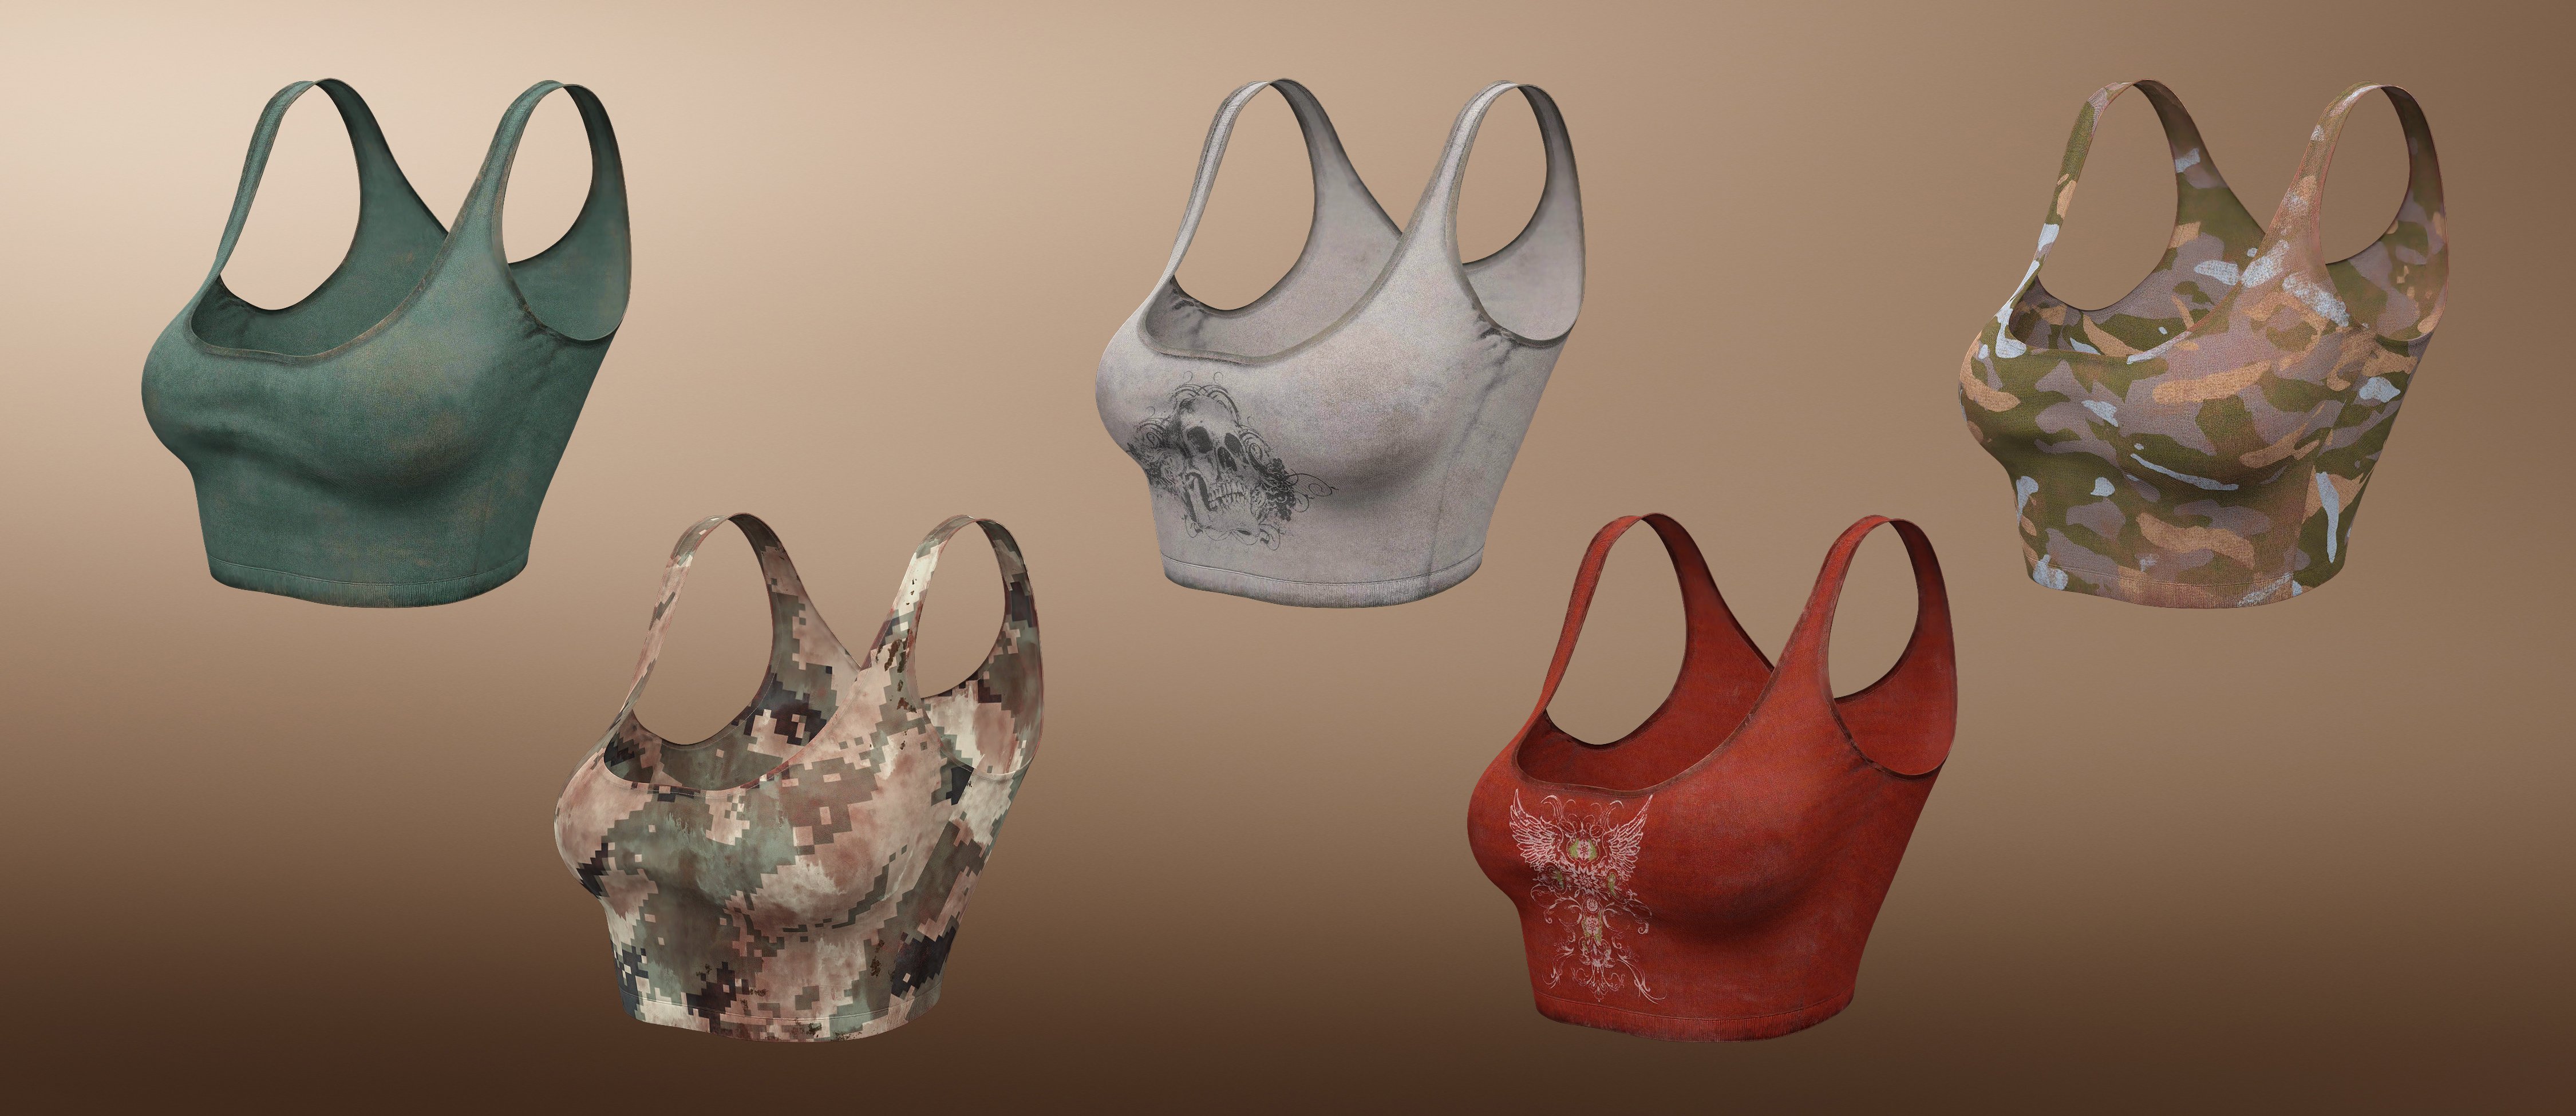 Survival Instinct Top for Genesis 8 and 8.1 Females by: Barbara Brundon, 3D Models by Daz 3D